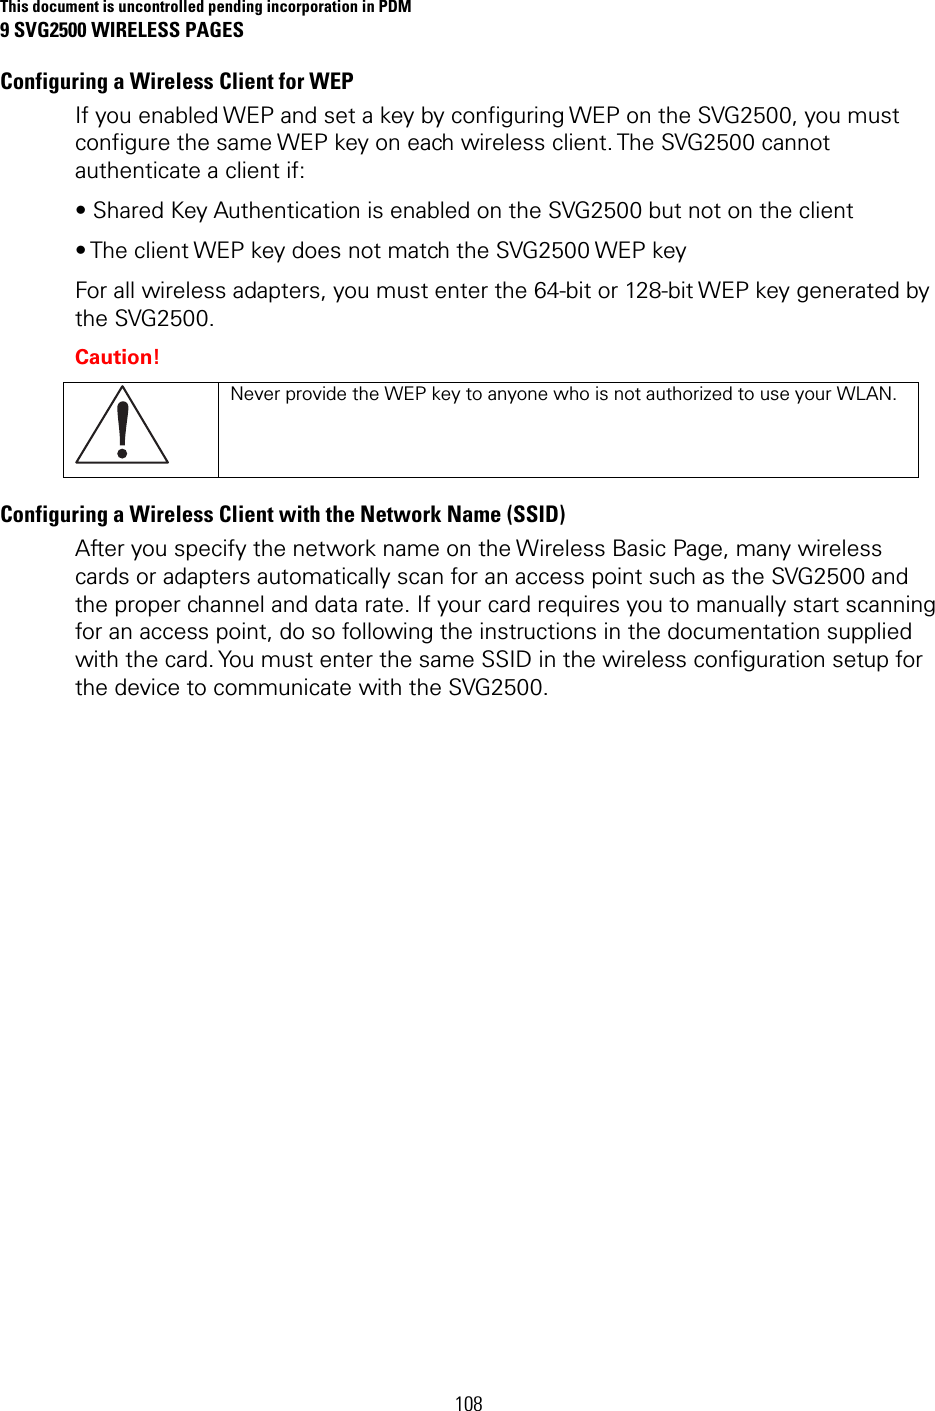 This document is uncontrolled pending incorporation in PDM 9 SVG2500 WIRELESS PAGES 108 Configuring a Wireless Client for WEP If you enabled WEP and set a key by configuring WEP on the SVG2500, you must configure the same WEP key on each wireless client. The SVG2500 cannot authenticate a client if: • Shared Key Authentication is enabled on the SVG2500 but not on the client • The client WEP key does not match the SVG2500 WEP key For all wireless adapters, you must enter the 64-bit or 128-bit WEP key generated by the SVG2500. Caution!  Never provide the WEP key to anyone who is not authorized to use your WLAN. Configuring a Wireless Client with the Network Name (SSID) After you specify the network name on the Wireless Basic Page, many wireless cards or adapters automatically scan for an access point such as the SVG2500 and the proper channel and data rate. If your card requires you to manually start scanning for an access point, do so following the instructions in the documentation supplied with the card. You must enter the same SSID in the wireless configuration setup for the device to communicate with the SVG2500.     